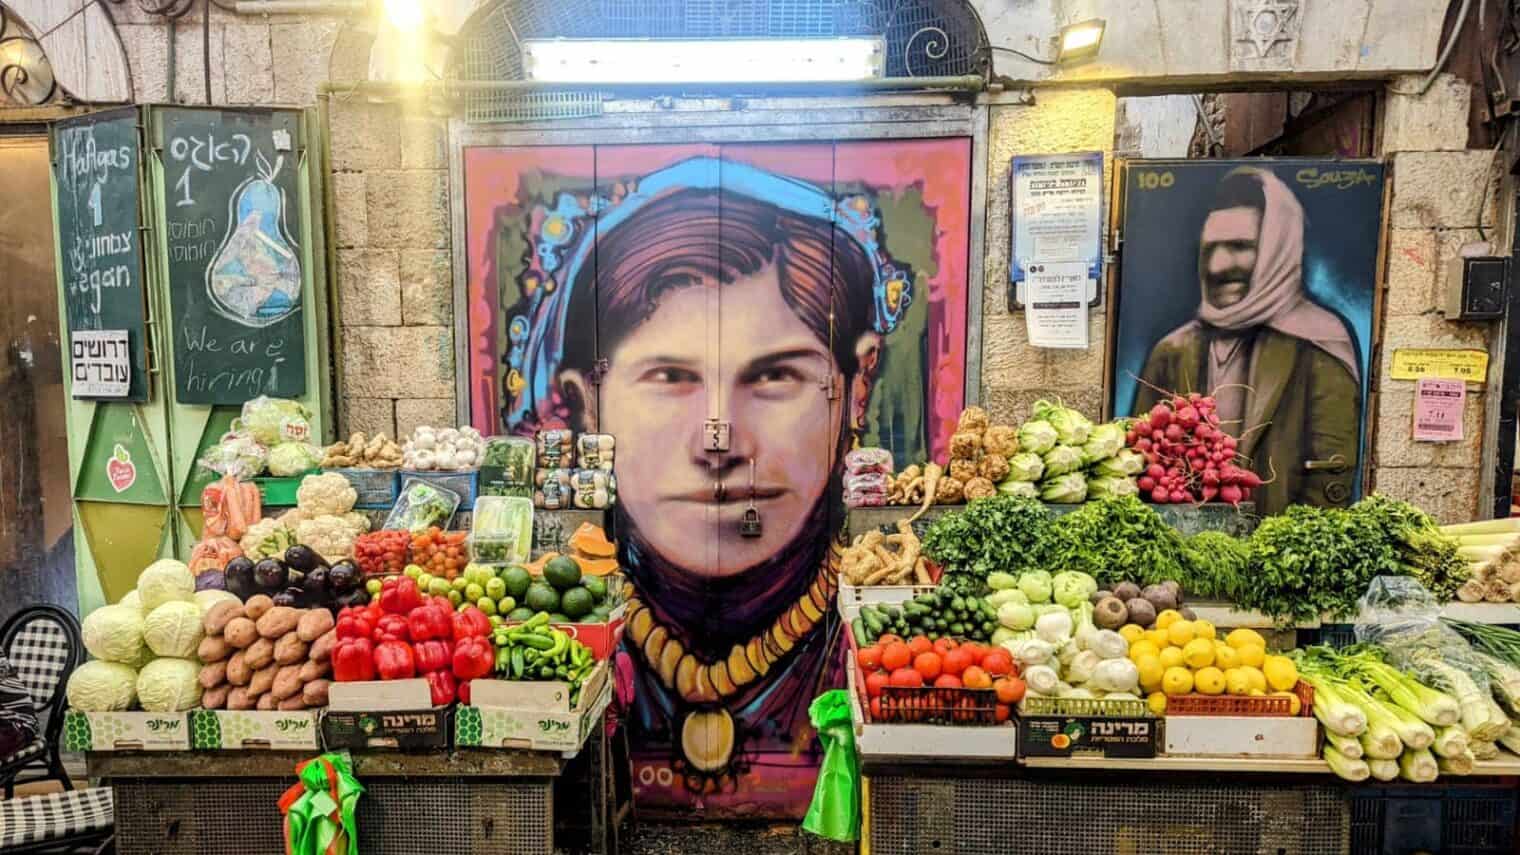 This market stall in Machane Yehudaâ€™s Agas (Pear) Street got a centennial facelift with portraits of the original houseâ€™s owners, Bachora and Meir Banai. Photo by Solomon Souza